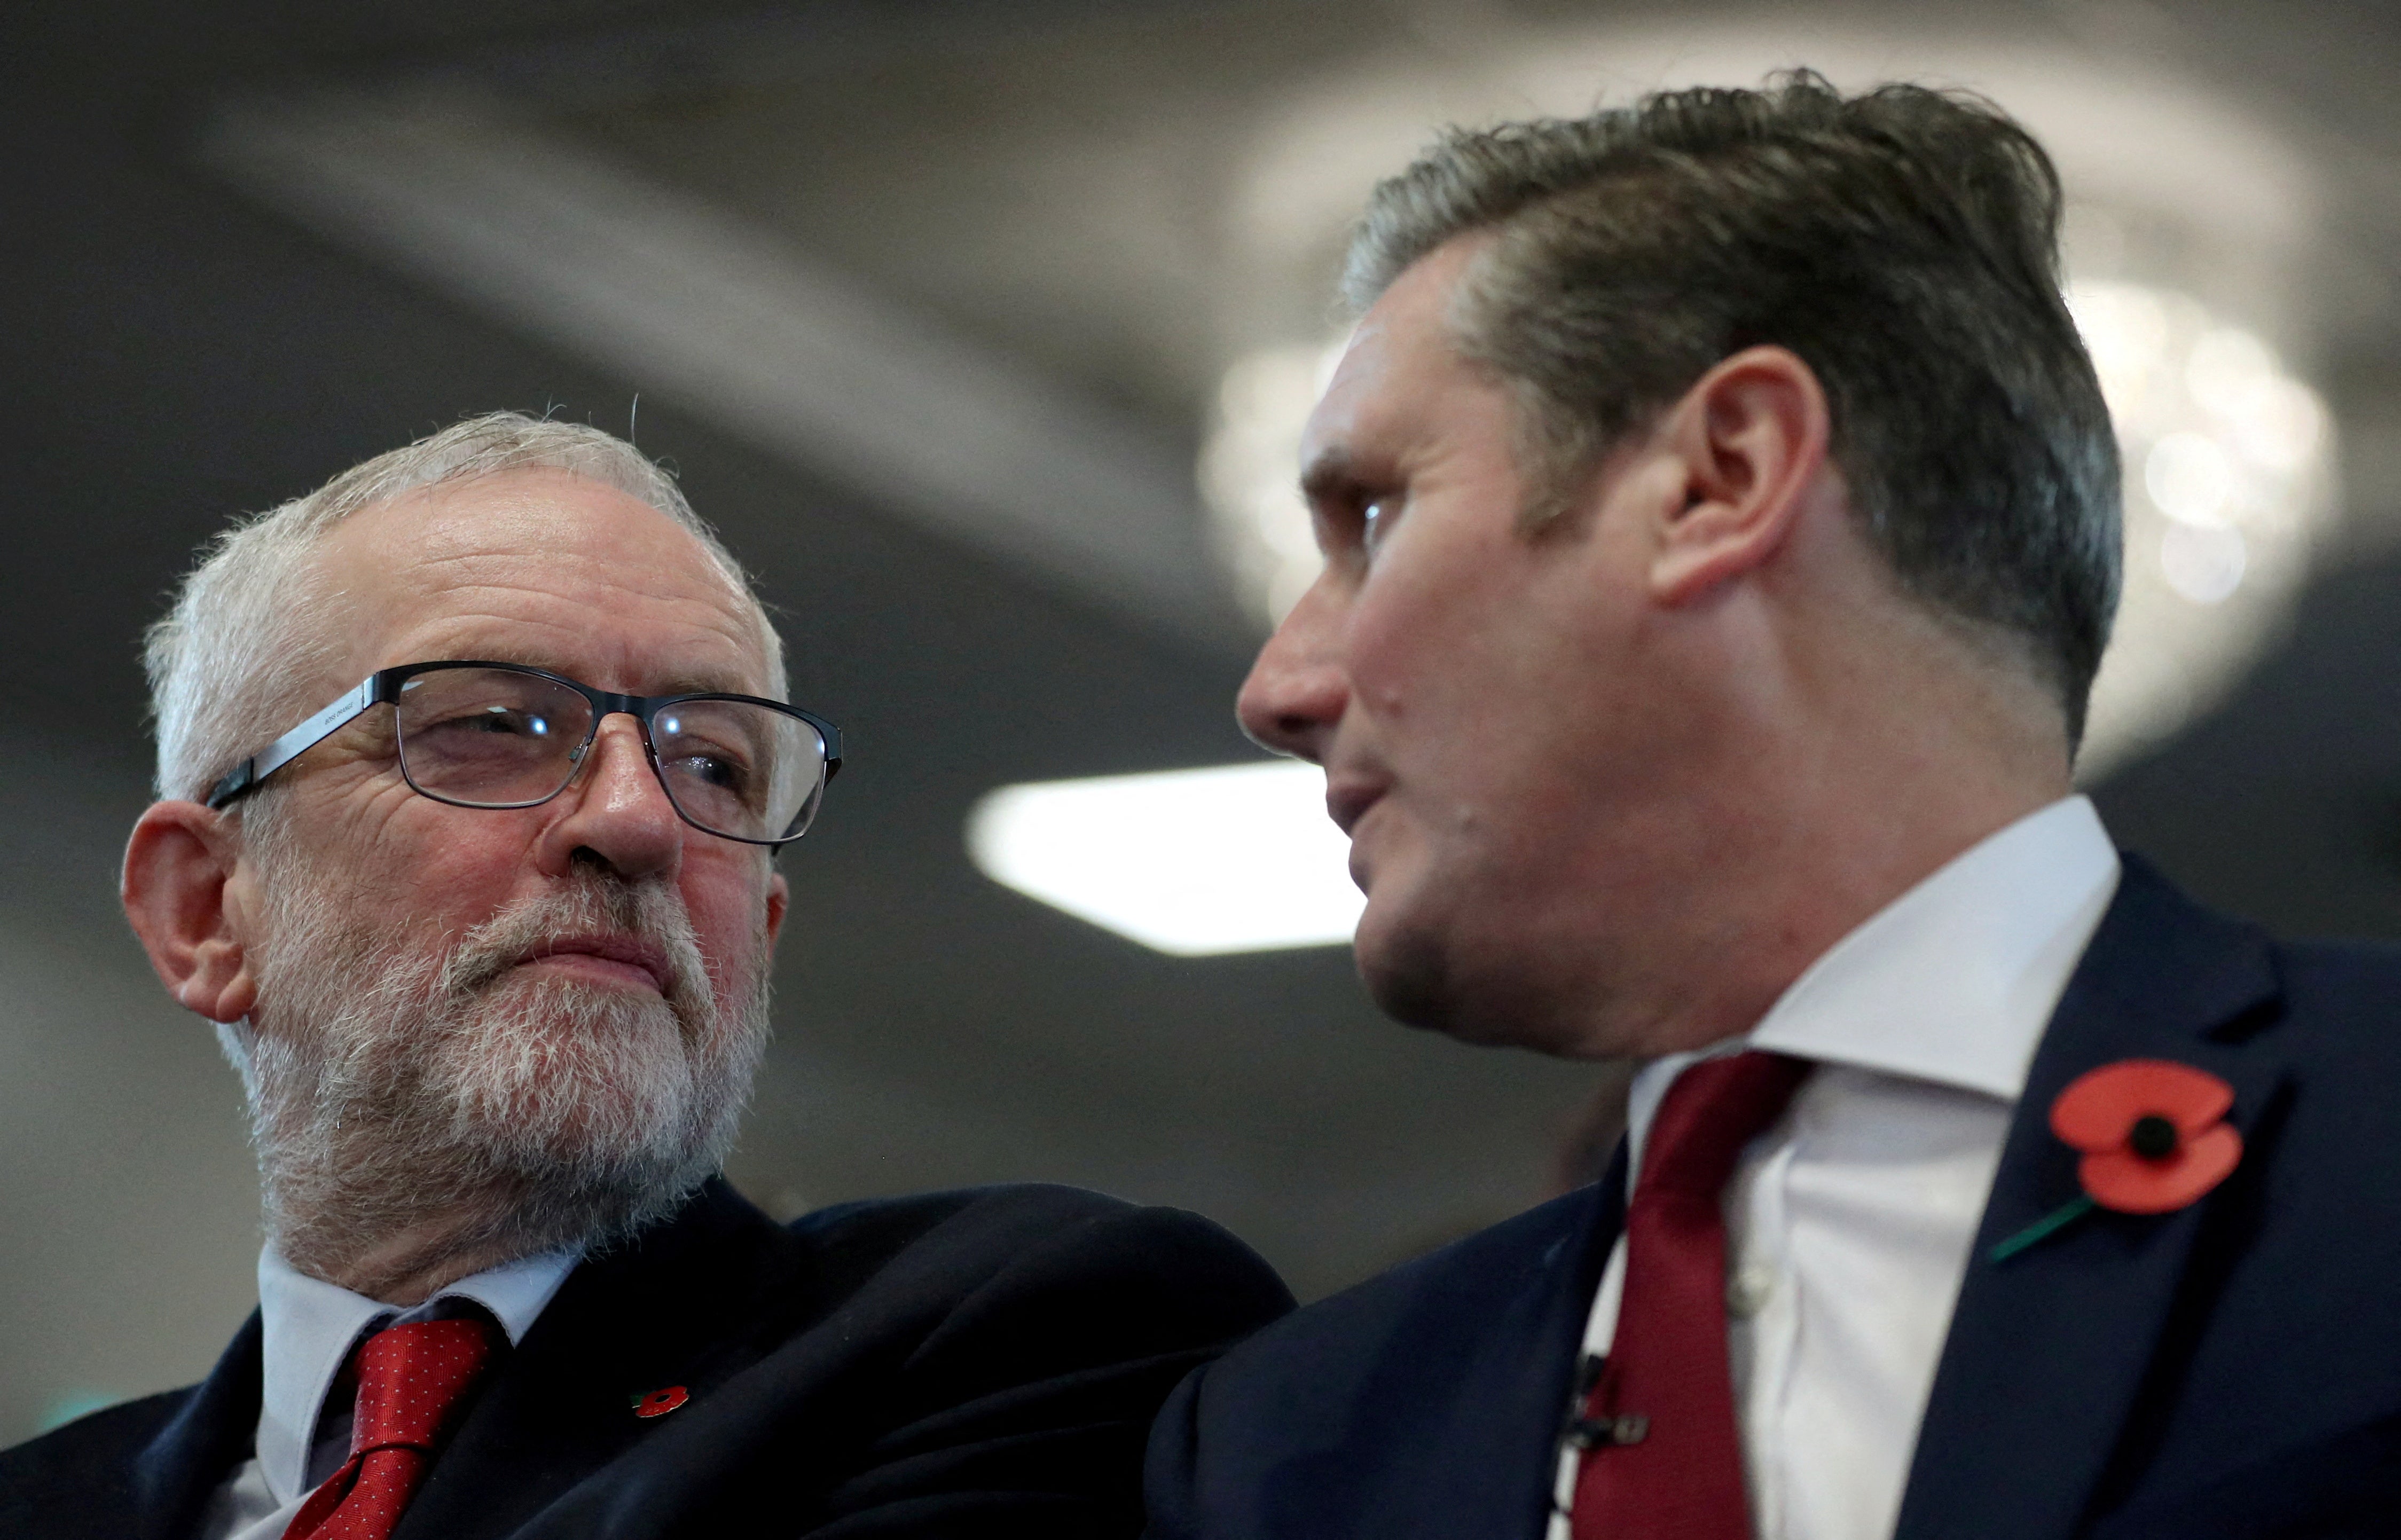 To win the Labour leadership Starmer had to pretend to be a Labour traditionalist, like Corbyn